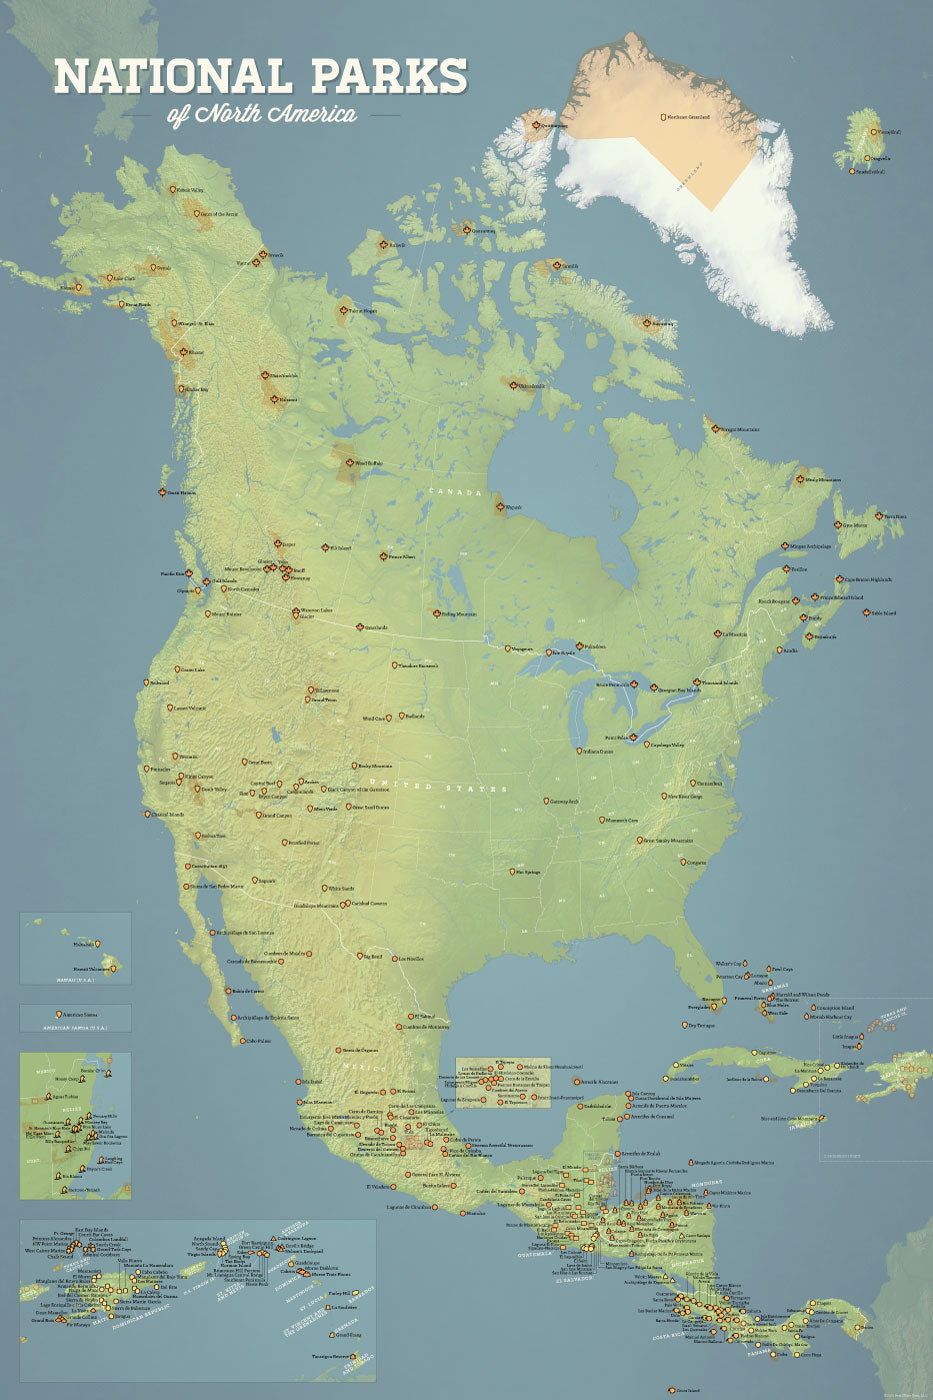 North America National Parks map poster - natural earth